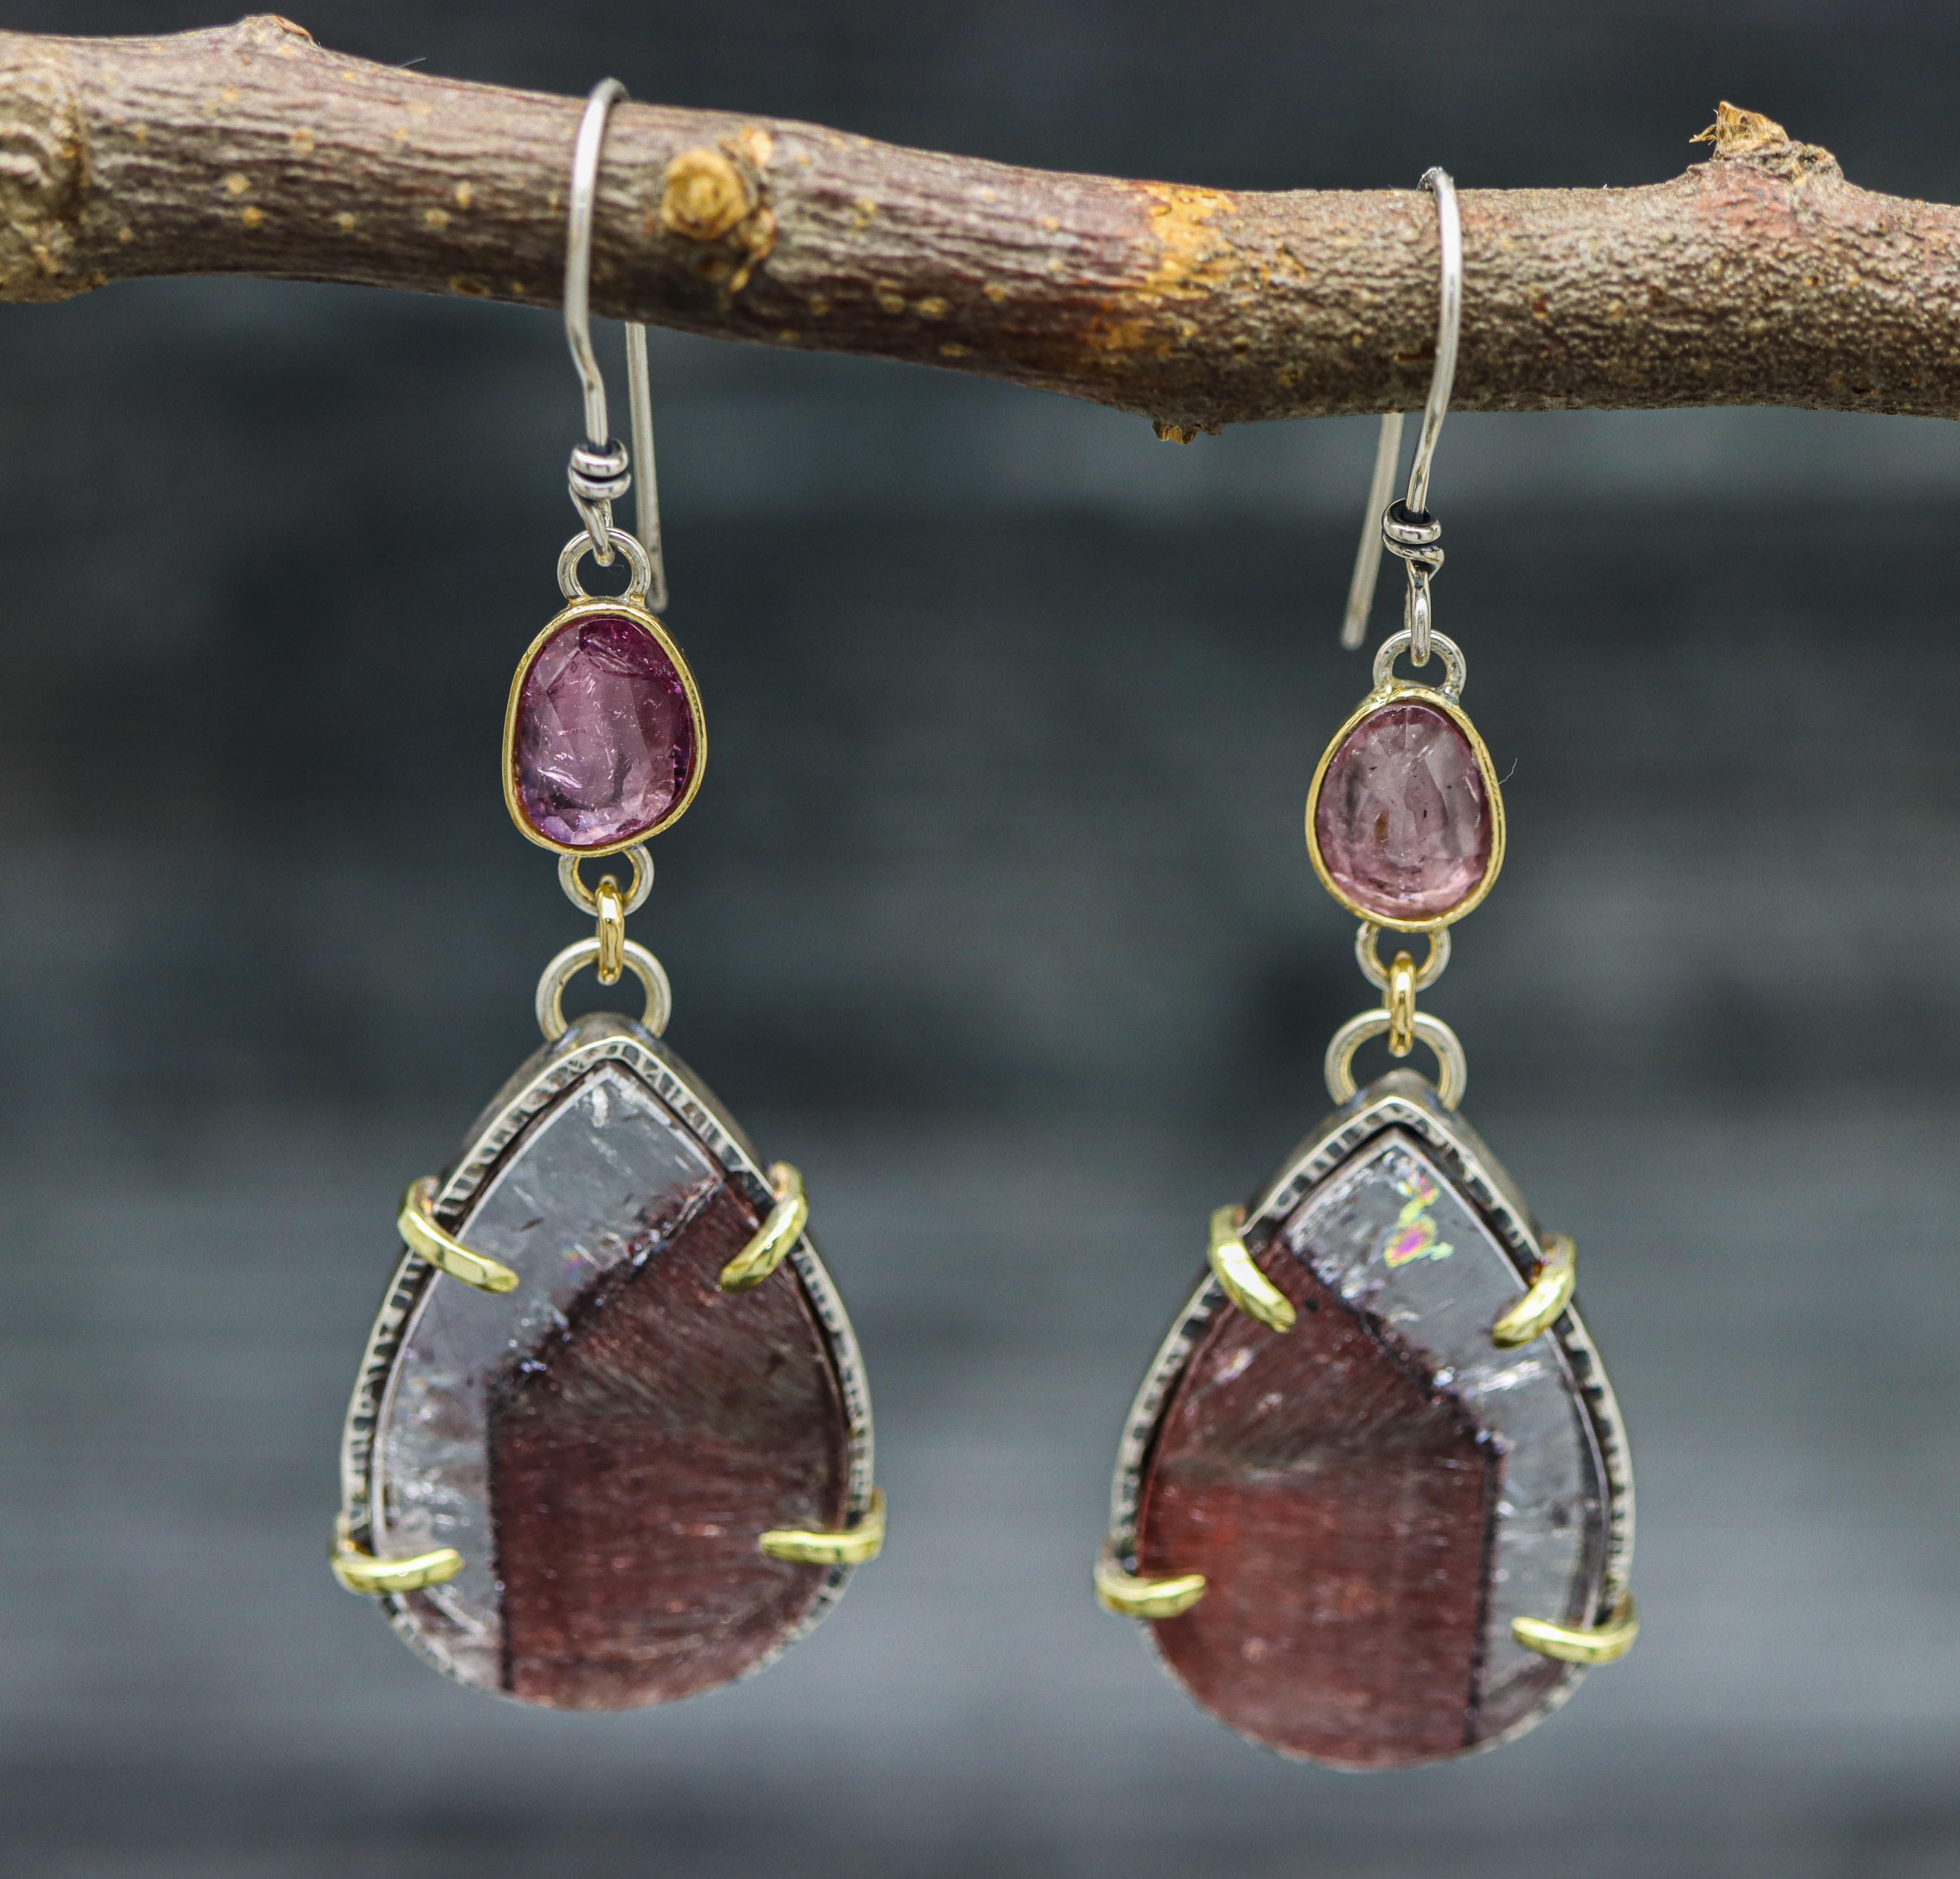 Epic Super Seven and Pink Tourmaline Dangle Earrings Sterling Silver and 18k Gold